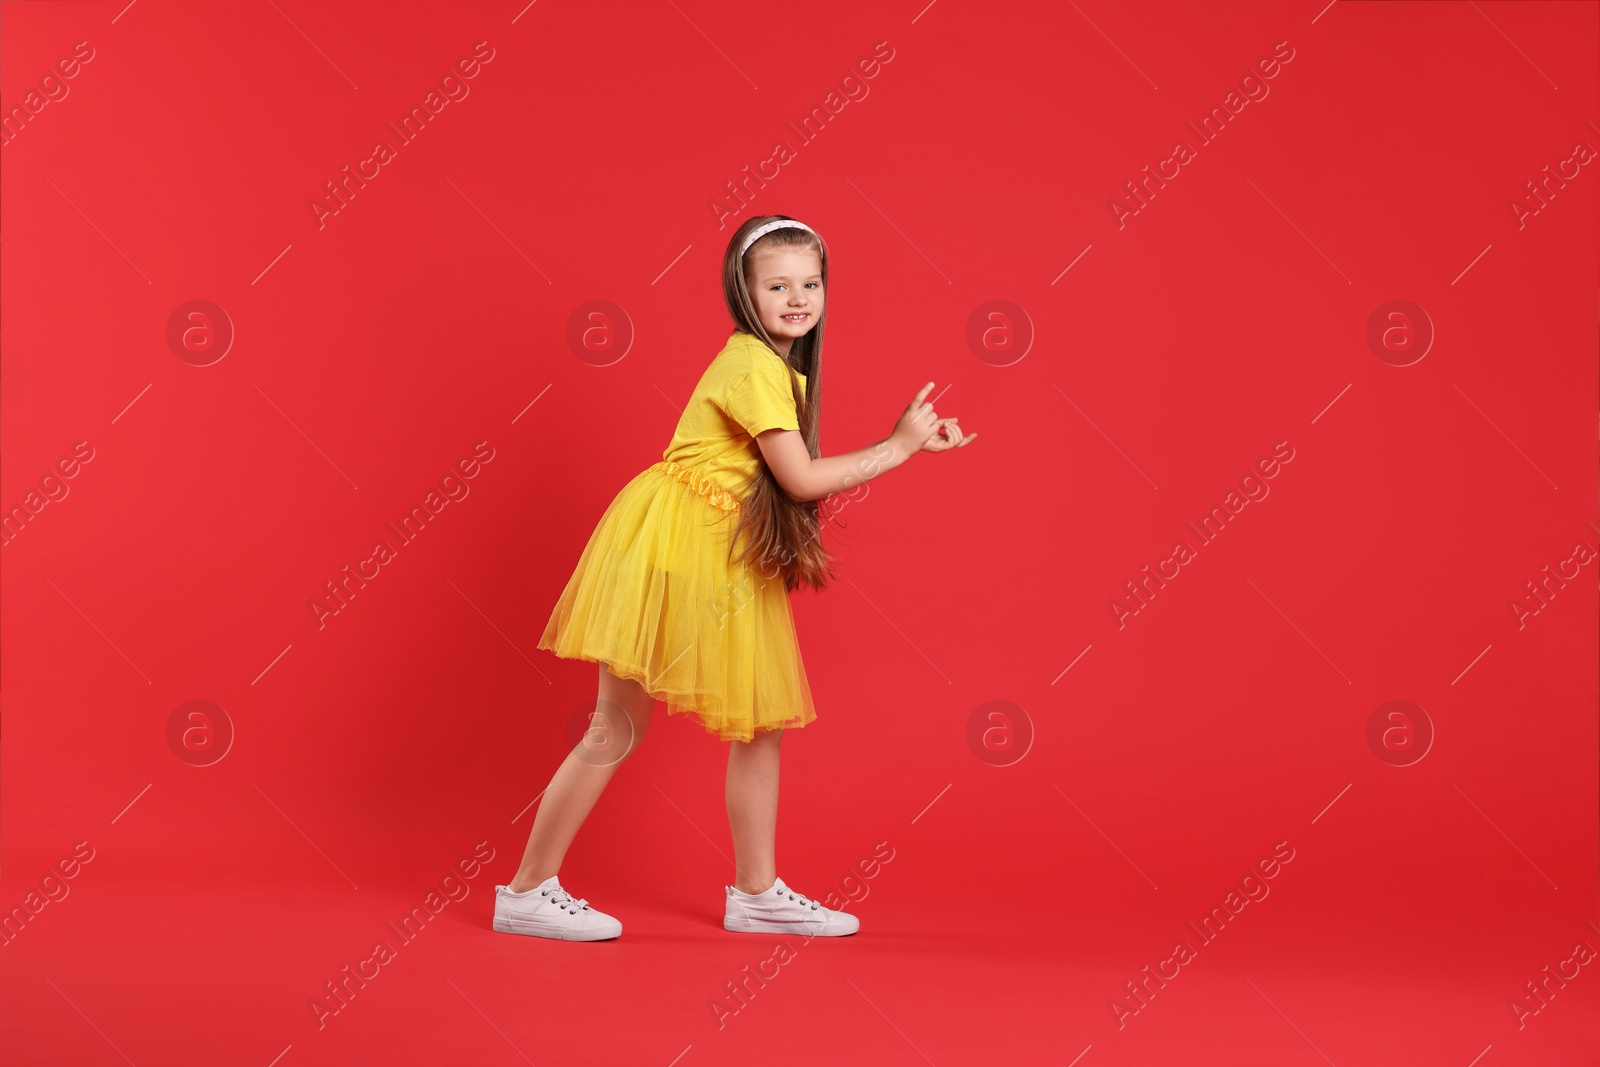 Photo of Cute little girl dancing on red background